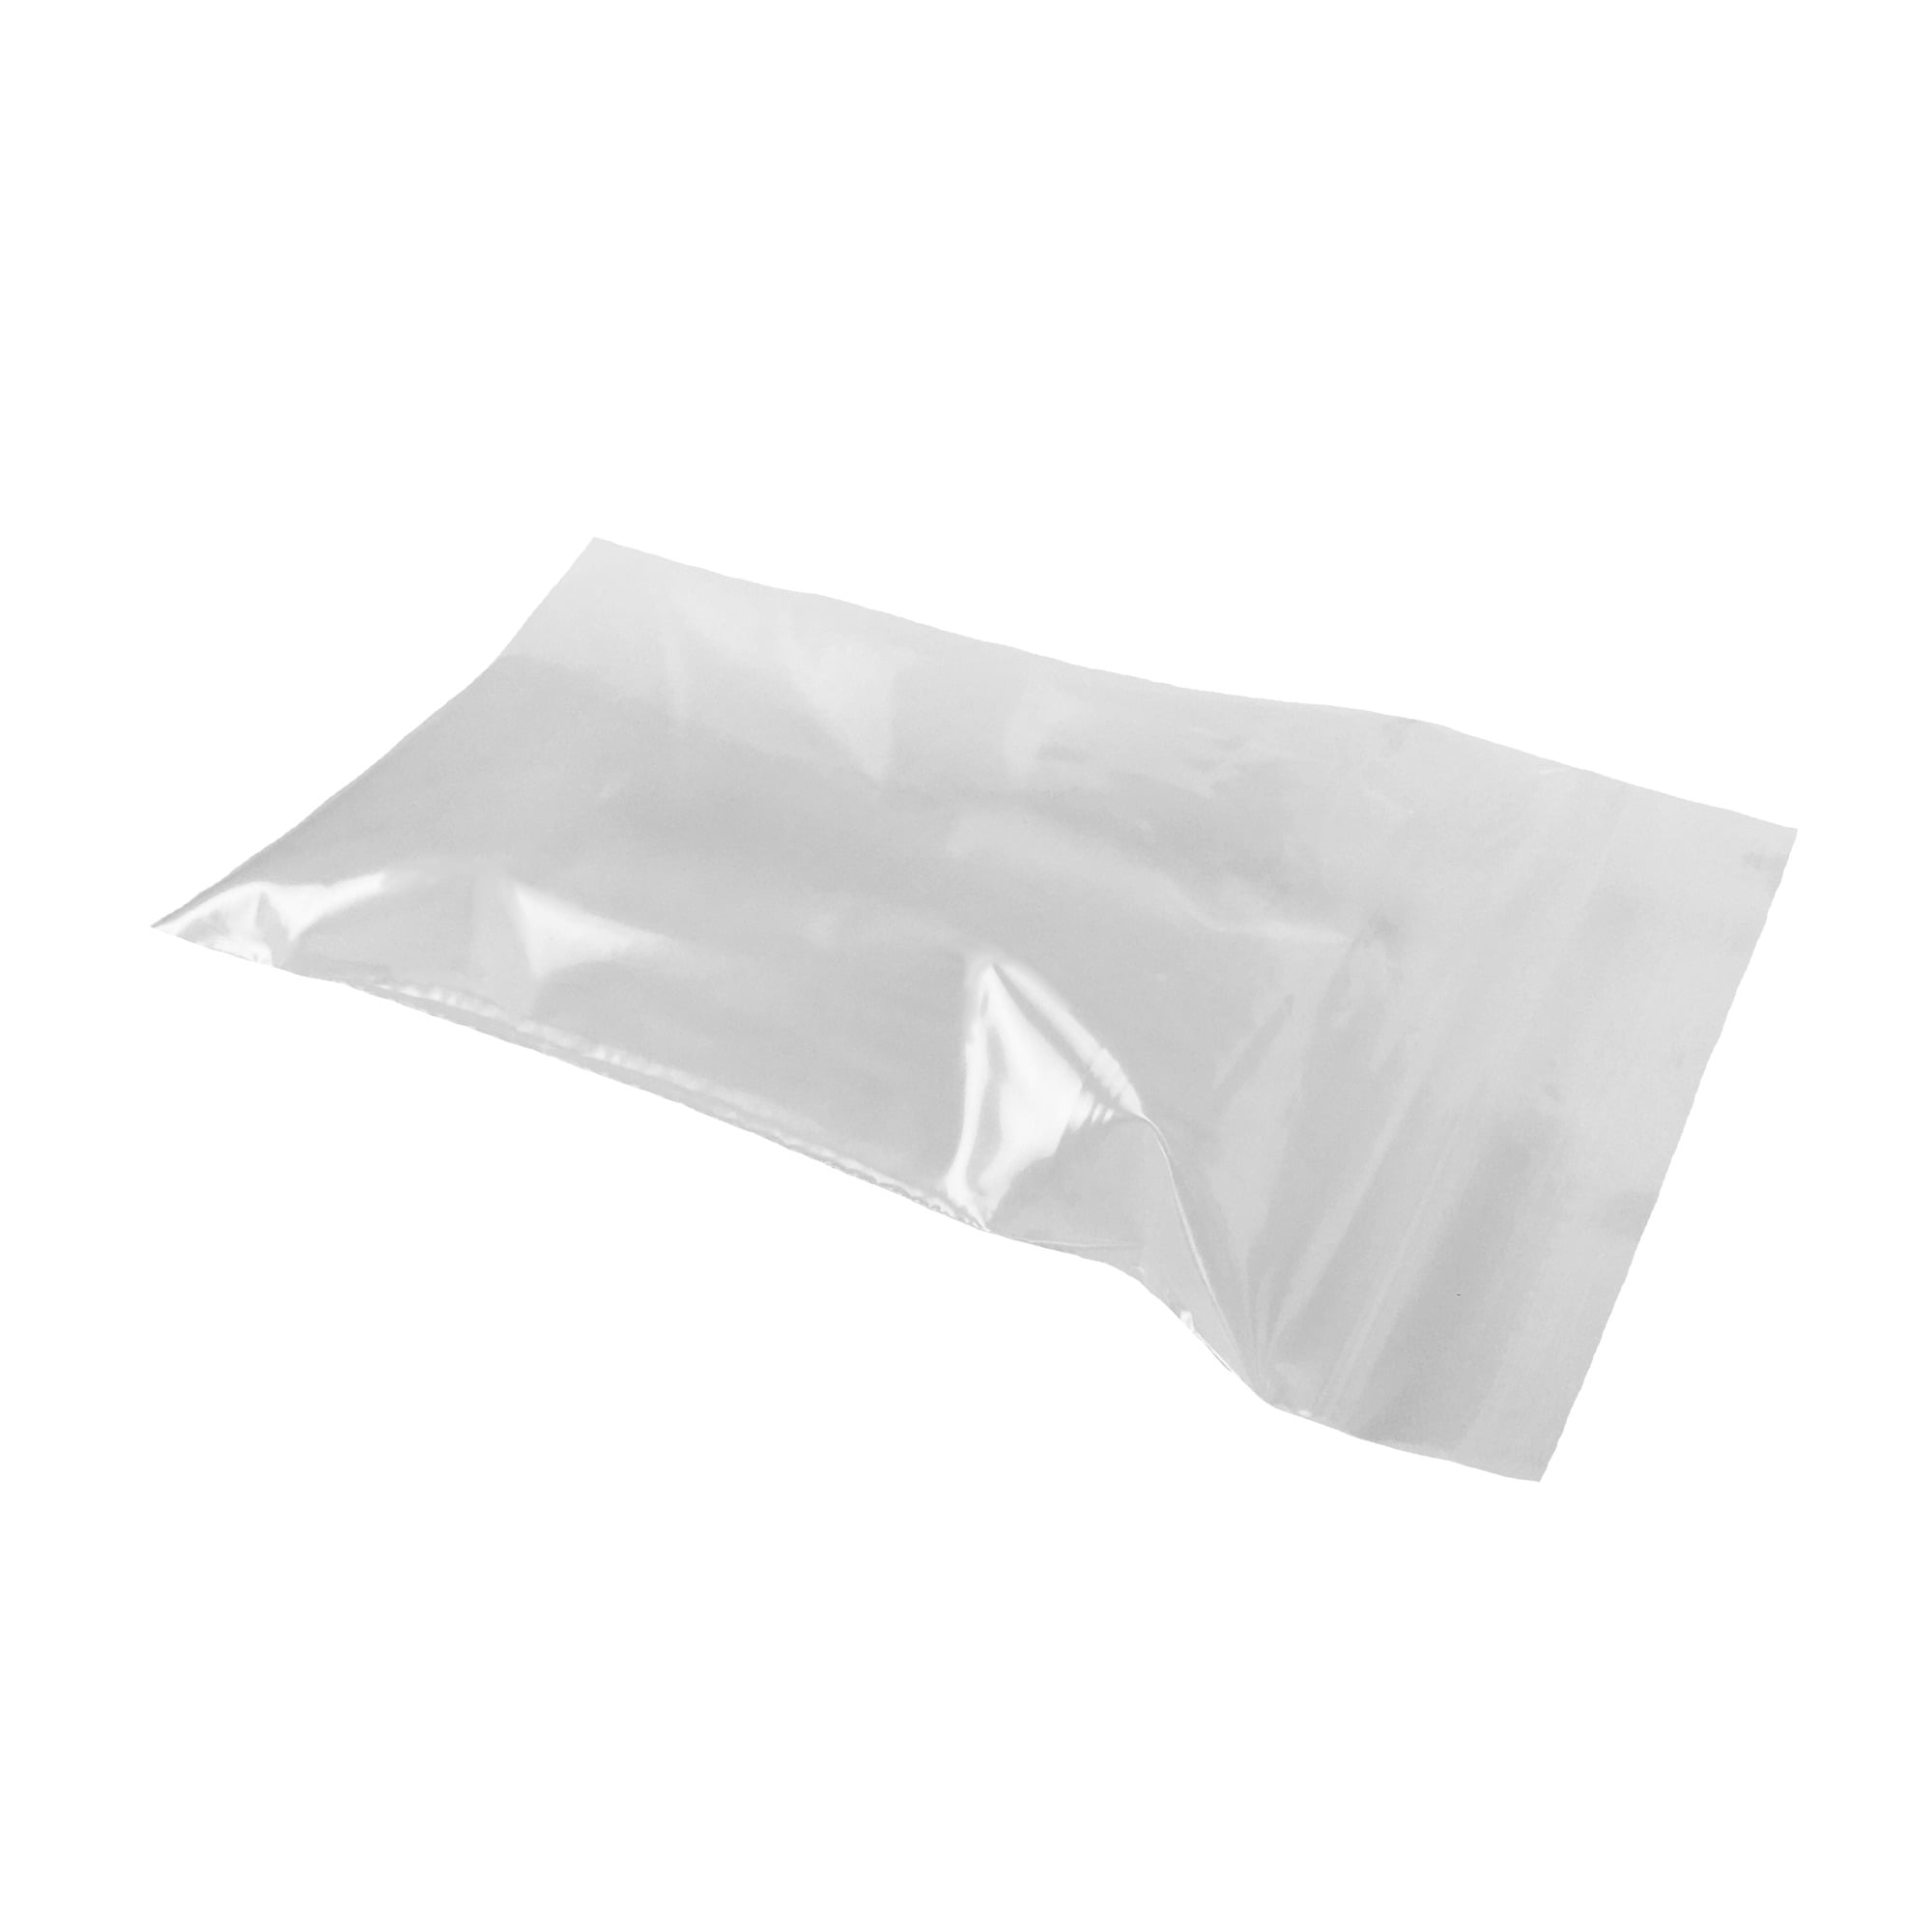 Carton of 200 Clear Gusseted Poly Bags Cs 680221309863 18x14x36x3 mil 